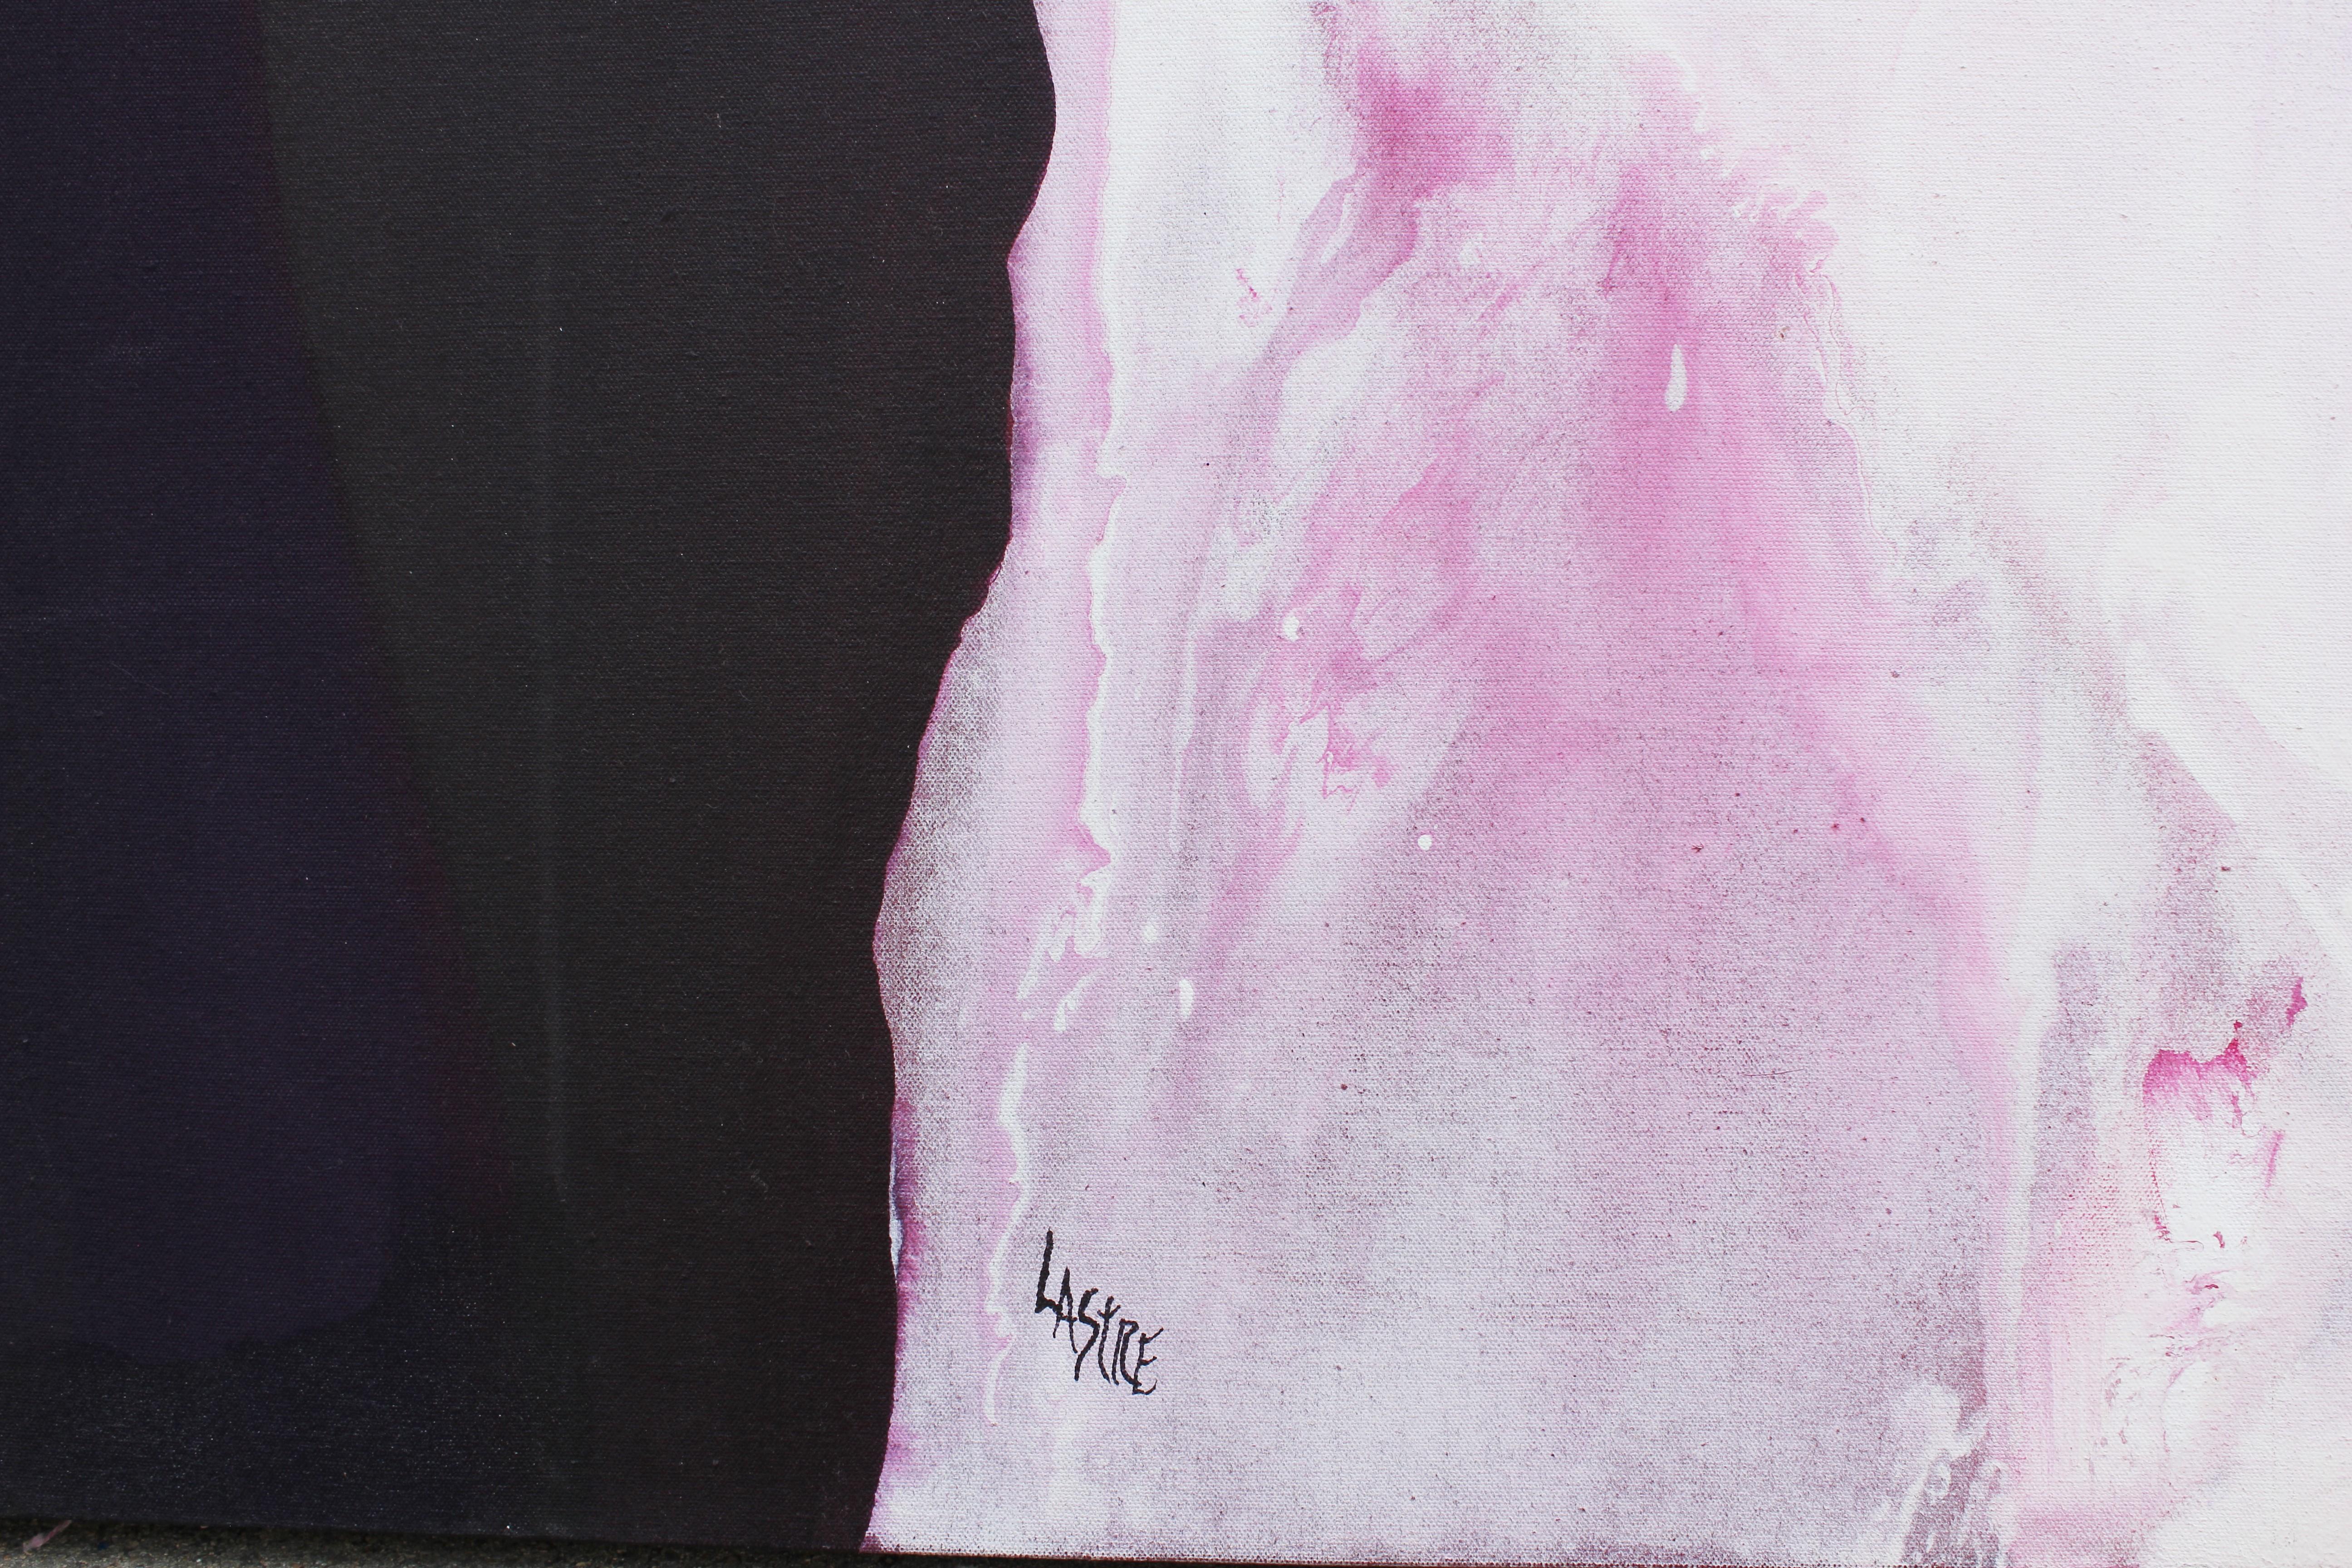 Purple expressionist painting of a female figure in a white dress. The painting is a part of the series titled 